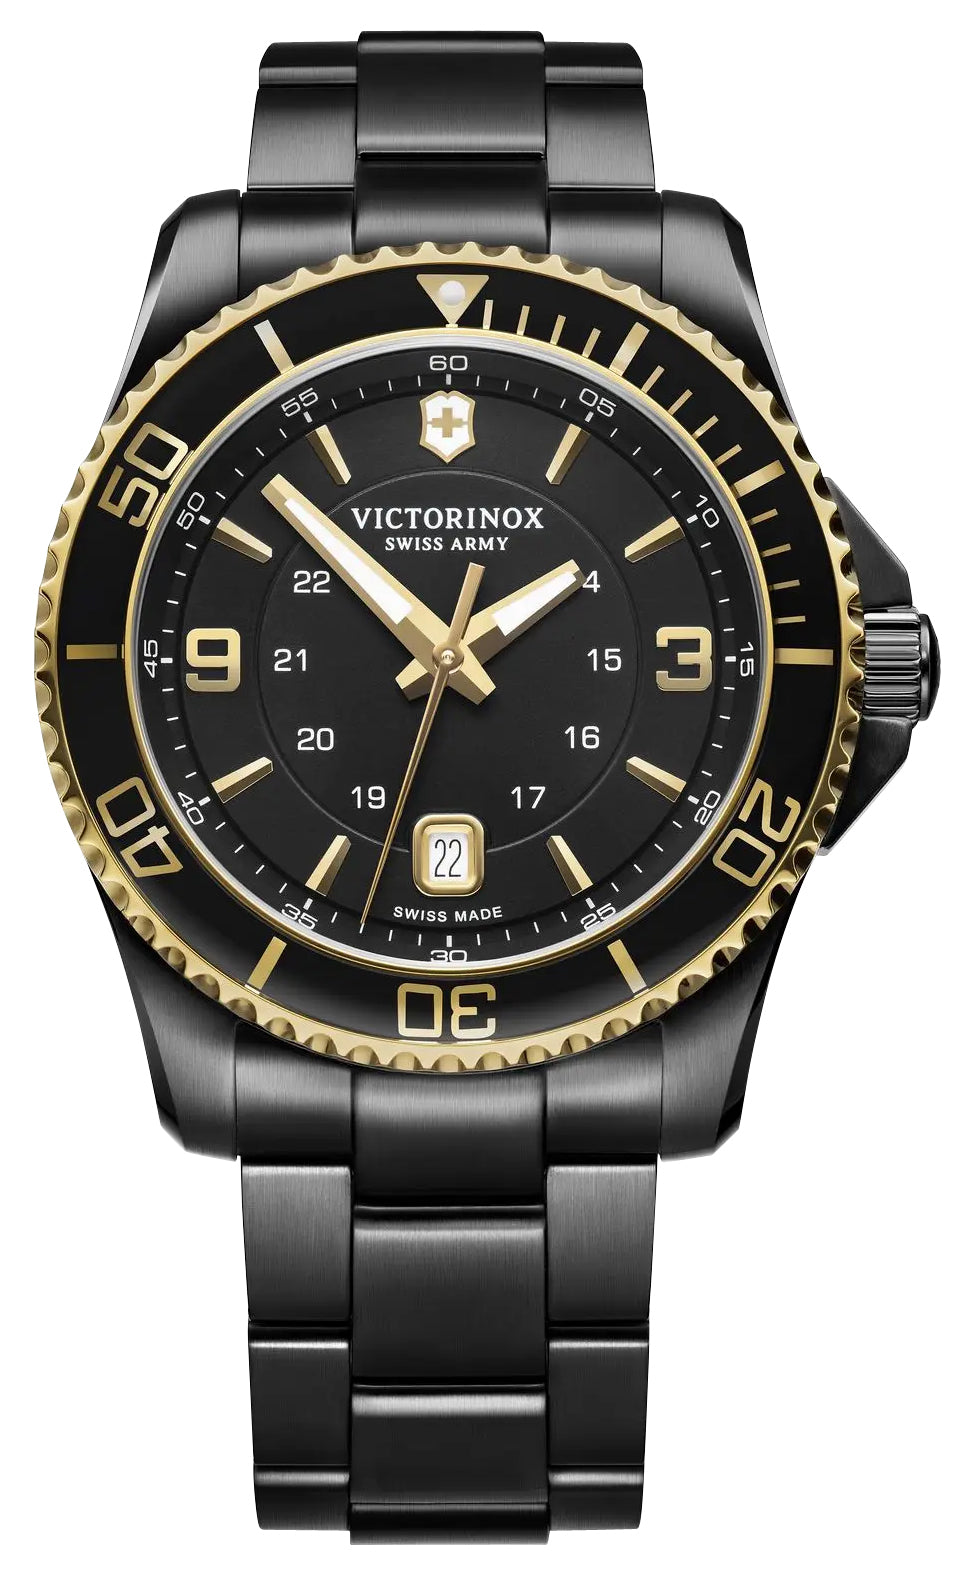 update alt-text with template Watches - Mens-Victorinox Swiss Army-241884-24-hour display, 40 - 45 mm, black, black PVD band, black PVD case, date, Maverick, mens, menswatches, new arrivals, round, rpSKU_241689, rpSKU_241698, rpSKU_241791, rpSKU_241797, rpSKU_241951, swiss quartz, uni-directional rotating bezel, Victorinox Swiss Army, watches-Watches & Beyond